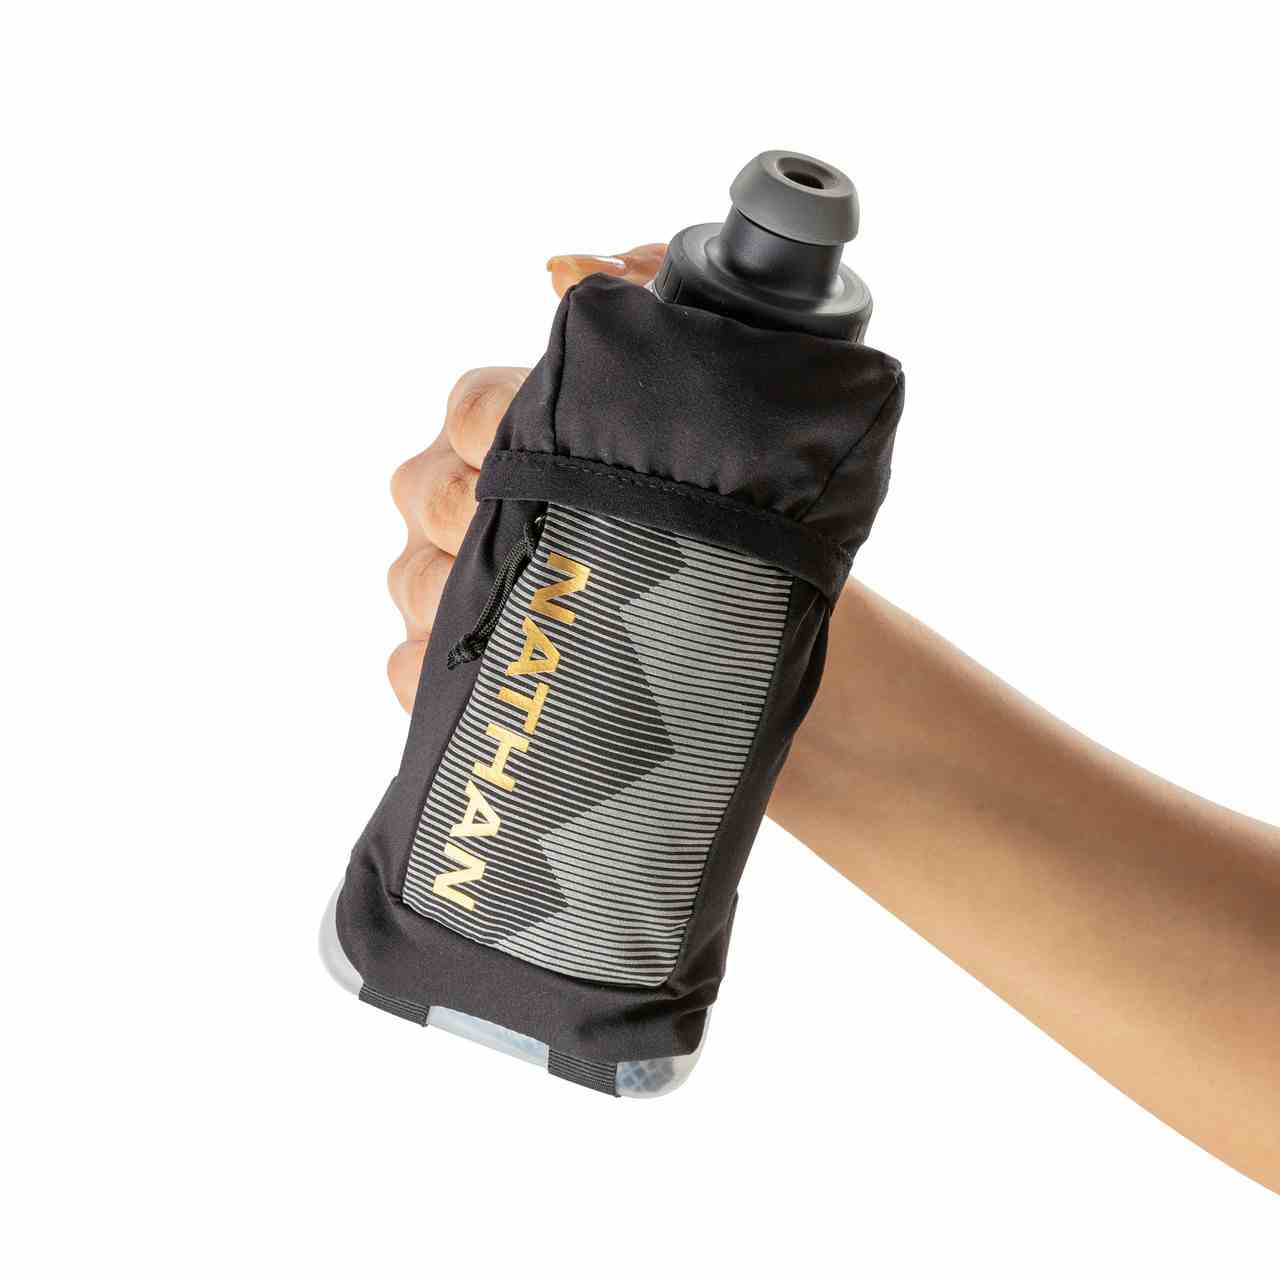 Quick Squeeze Insulated Handheld Bottle 12 oz Black/Gold